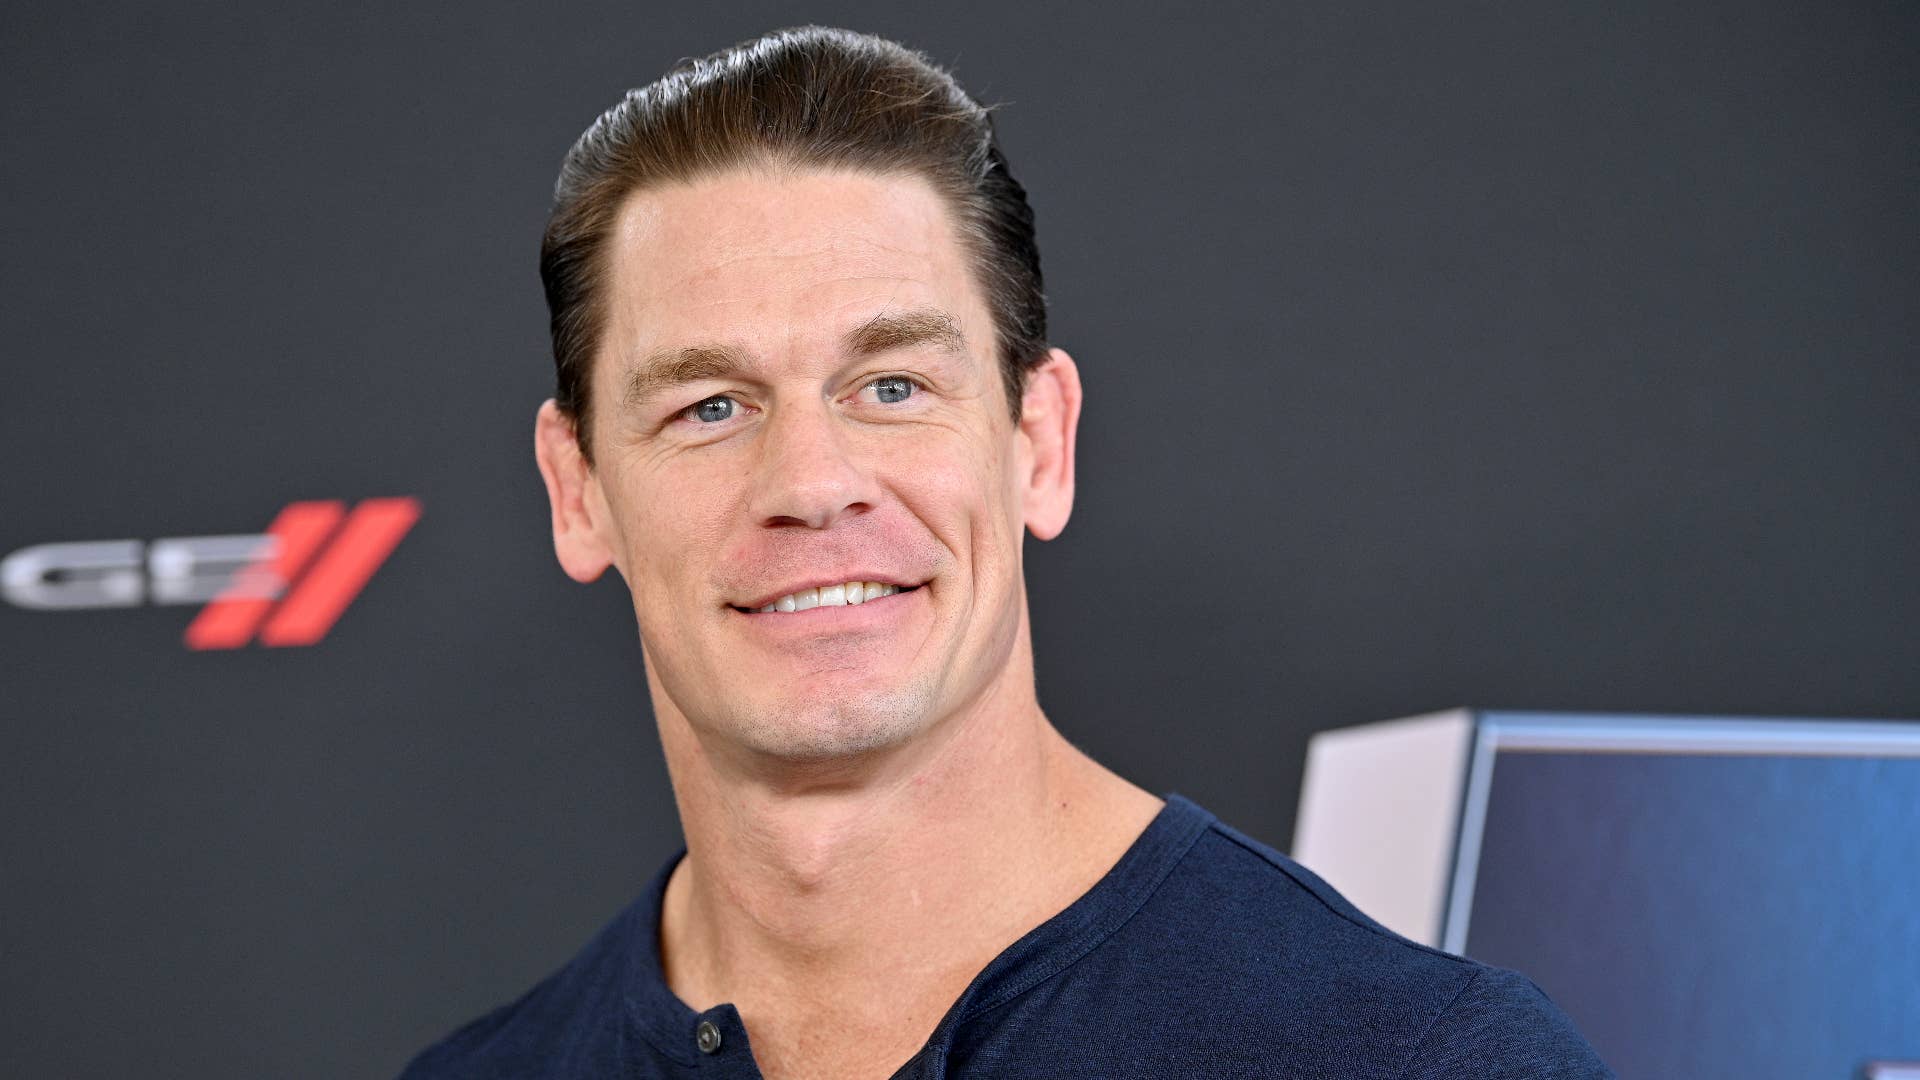 John Cena attends "The Road to F9" Global Fan Extravaganza.